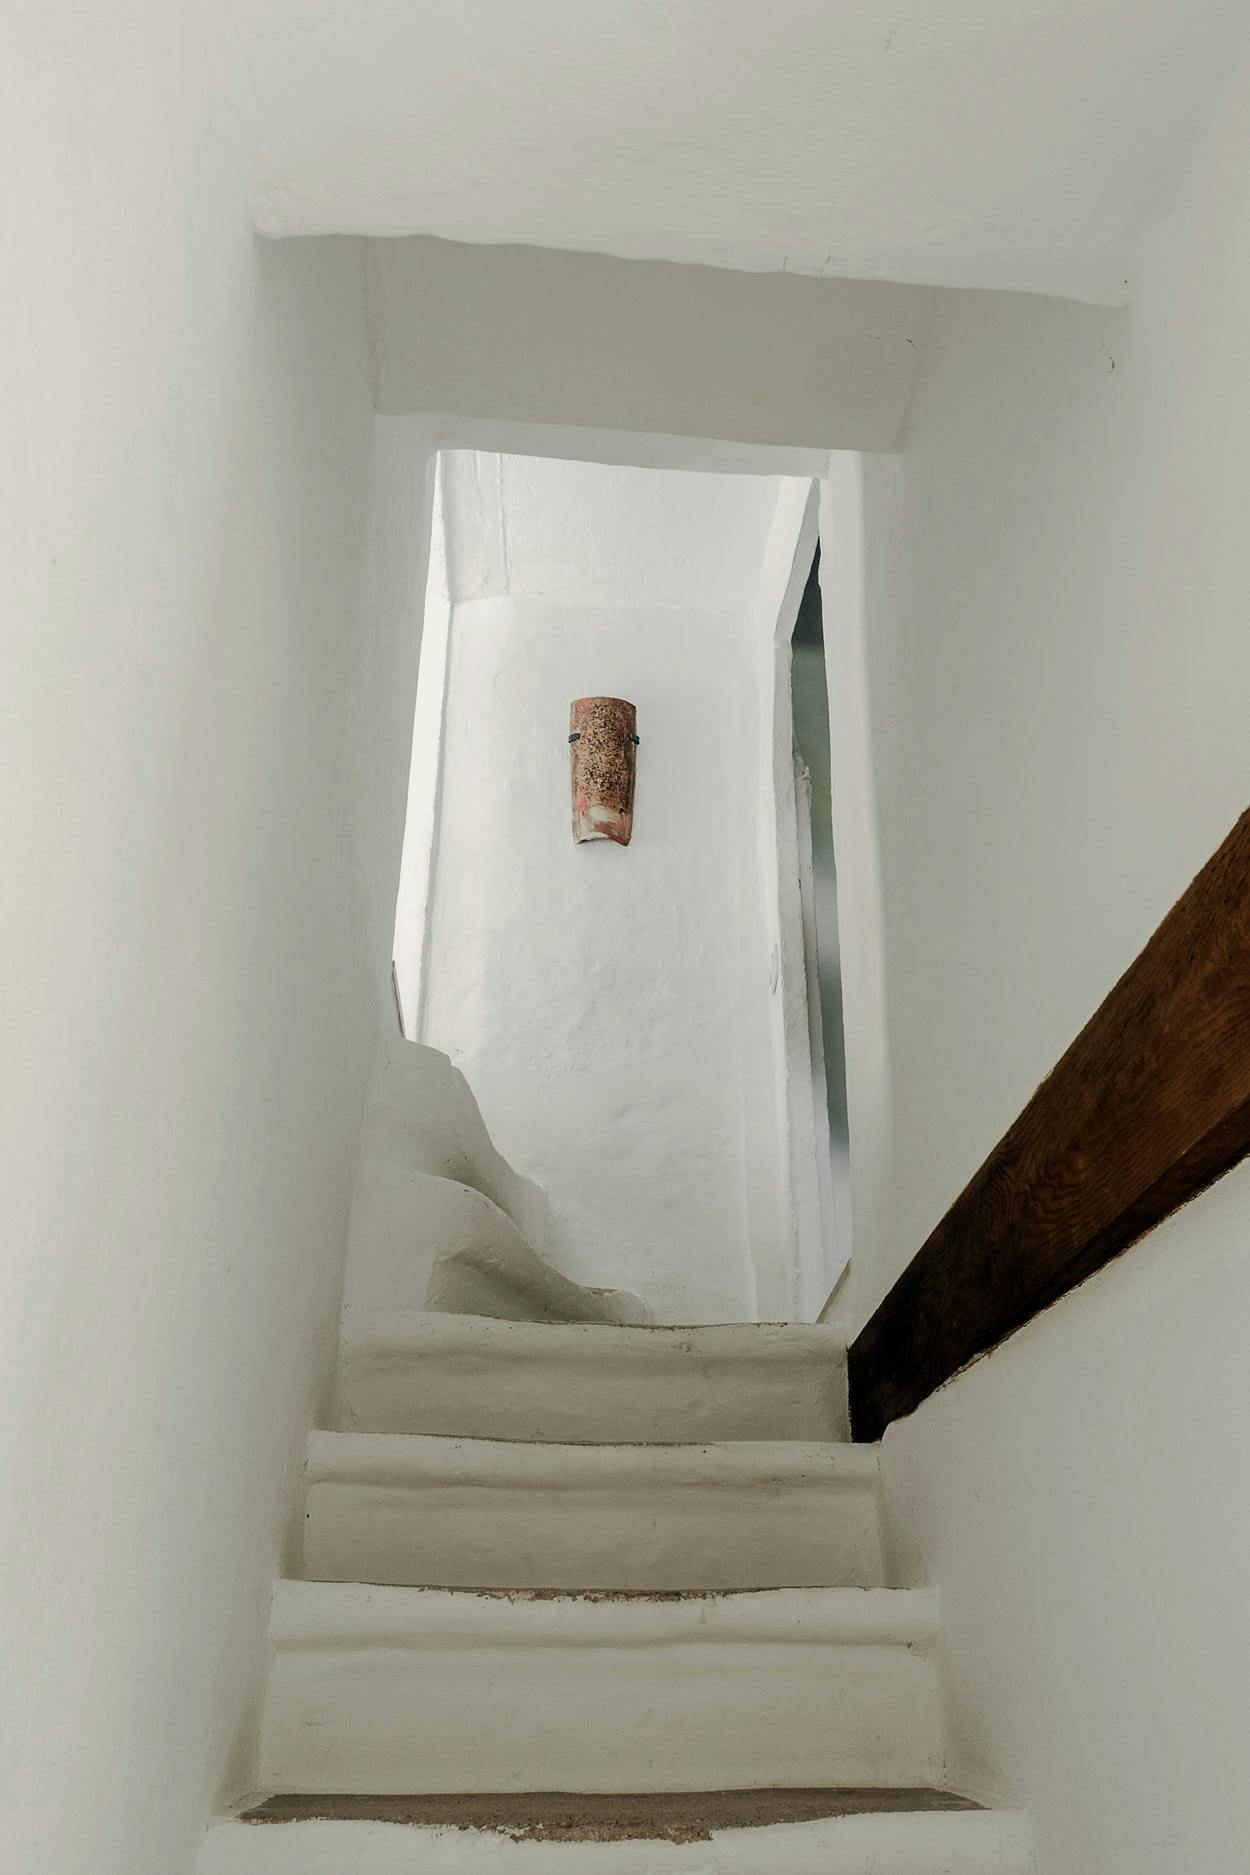 A white staircase with a wooden railing is shown in a white room, with a small window above it.